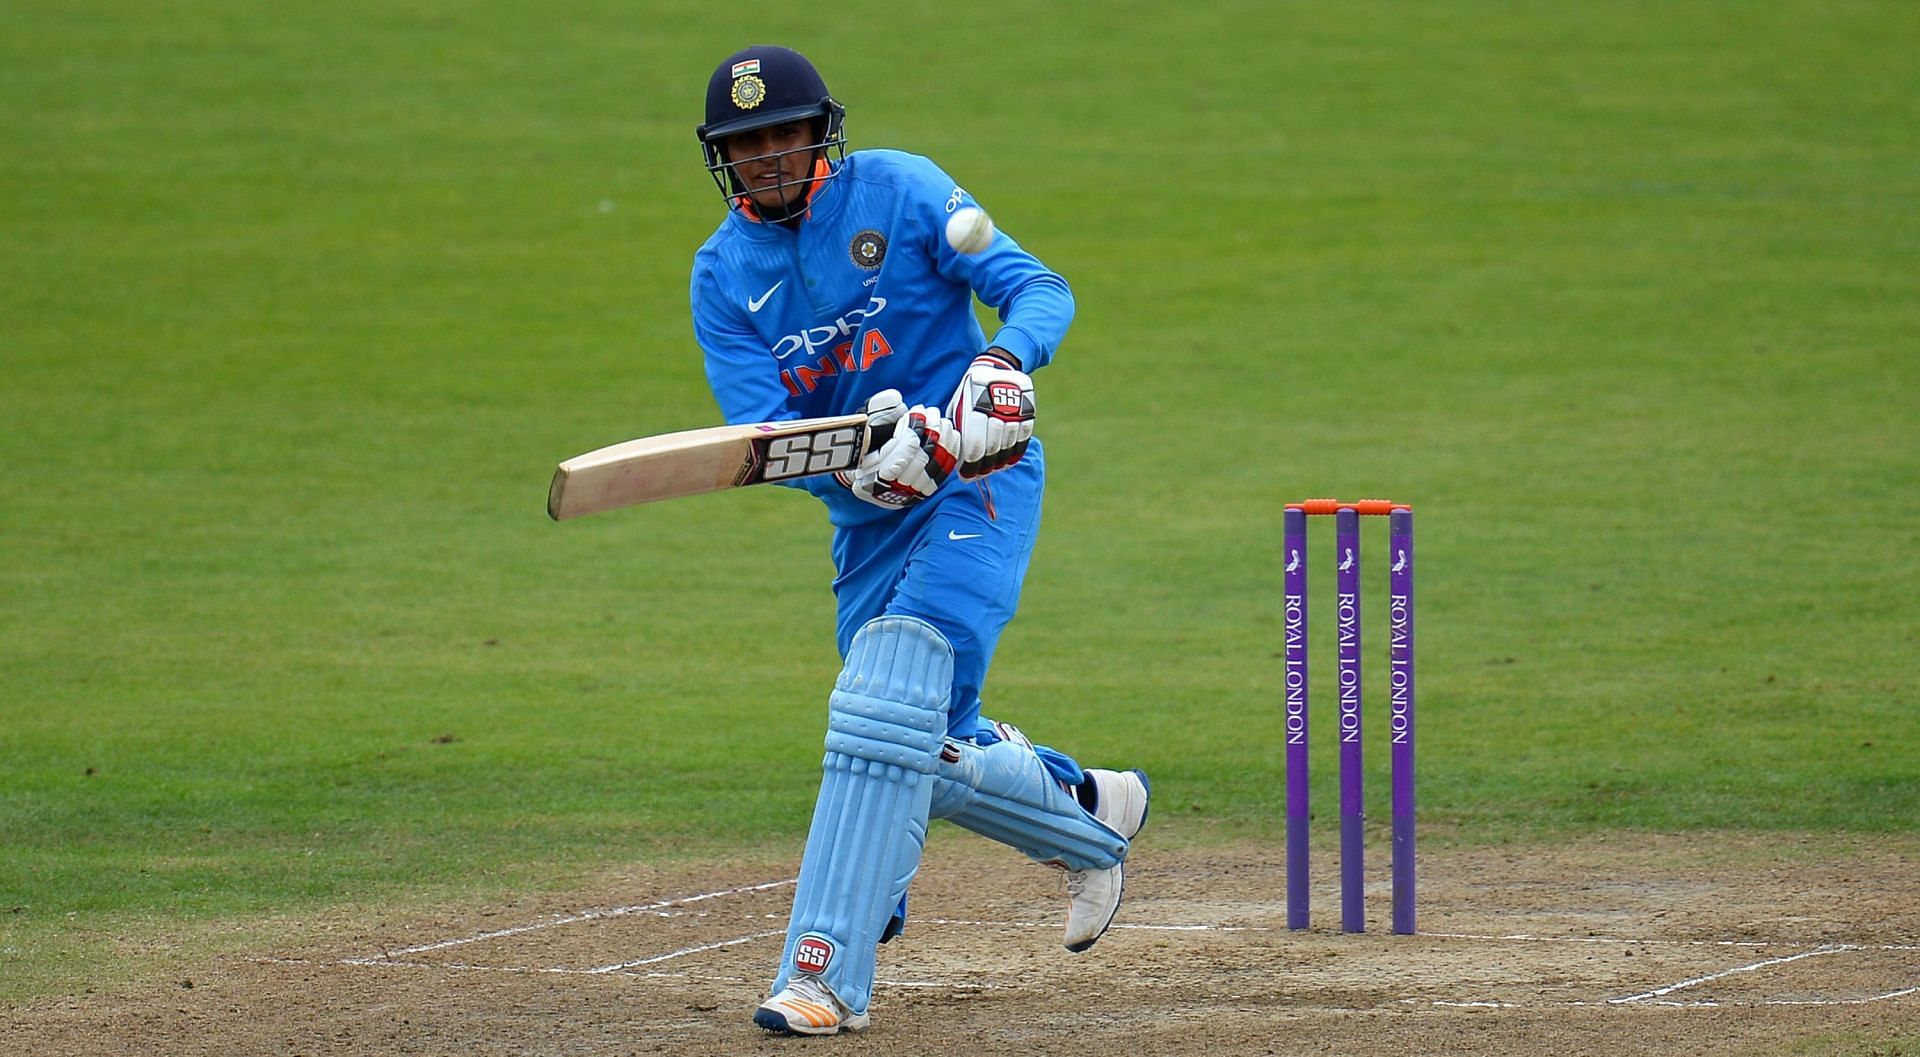 Shubman Gill rose to prominence with his excellent performances at the Under-19 level